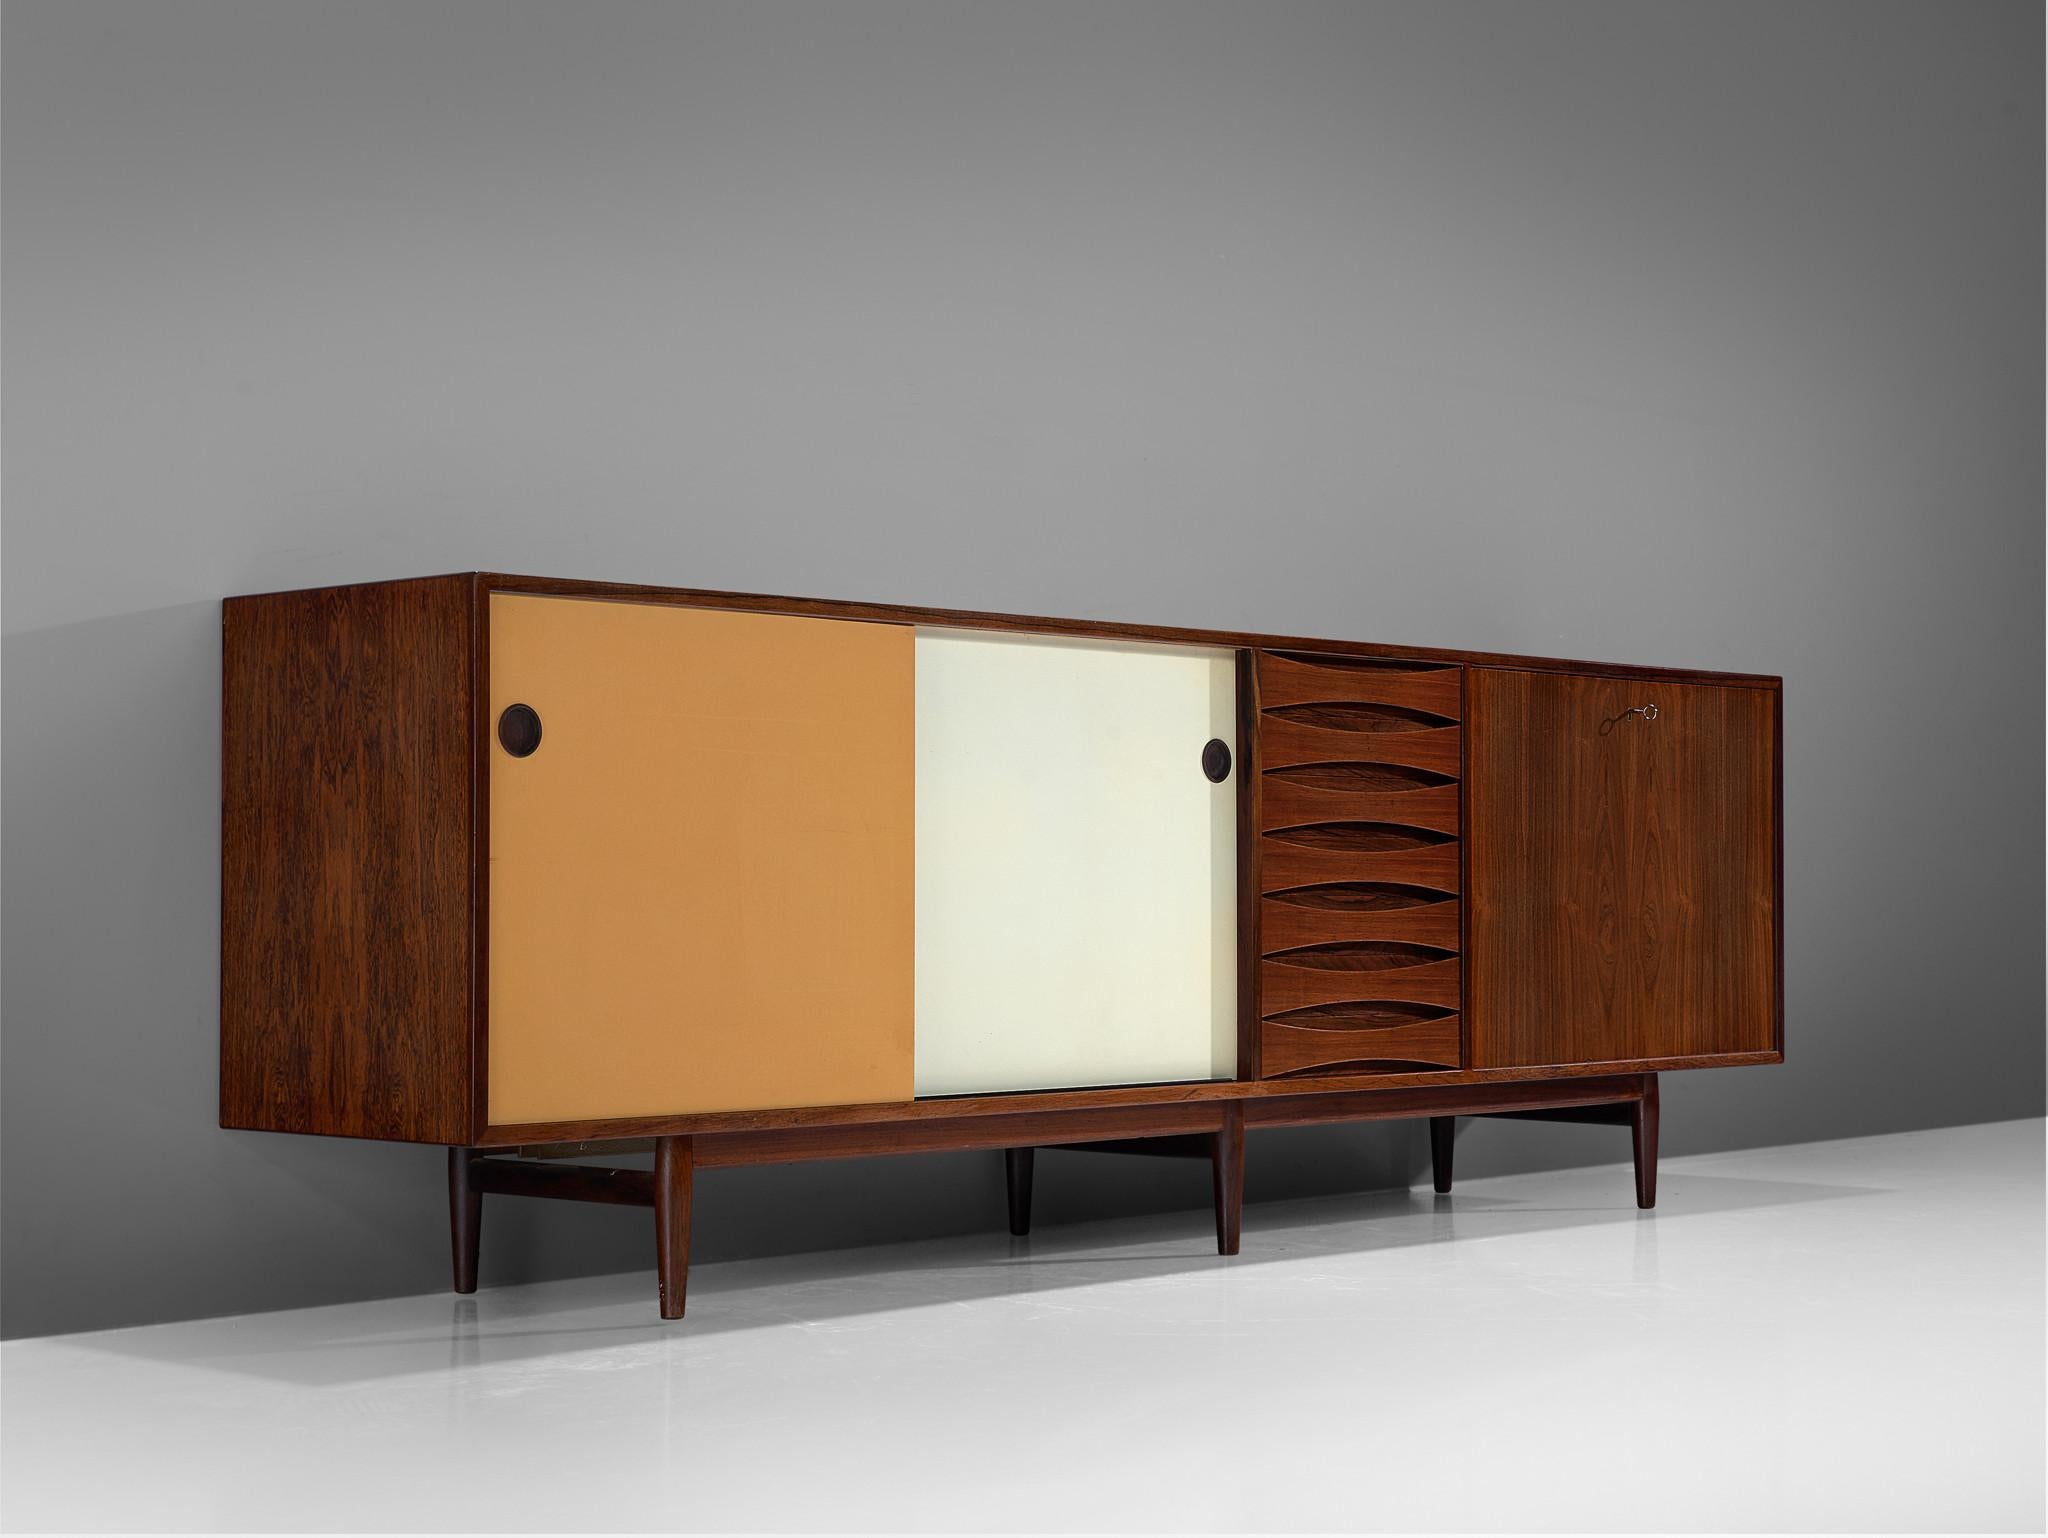 Arne Vodder for P. Olsen Sibast Møbler, 'Triennale' credenza model 29A, rosewood, Denmark, 1959.

Excellent sideboard in rosewood by Danish designer Arne Vodder. Typical highly refined details can be found on this sideboard, for example, the